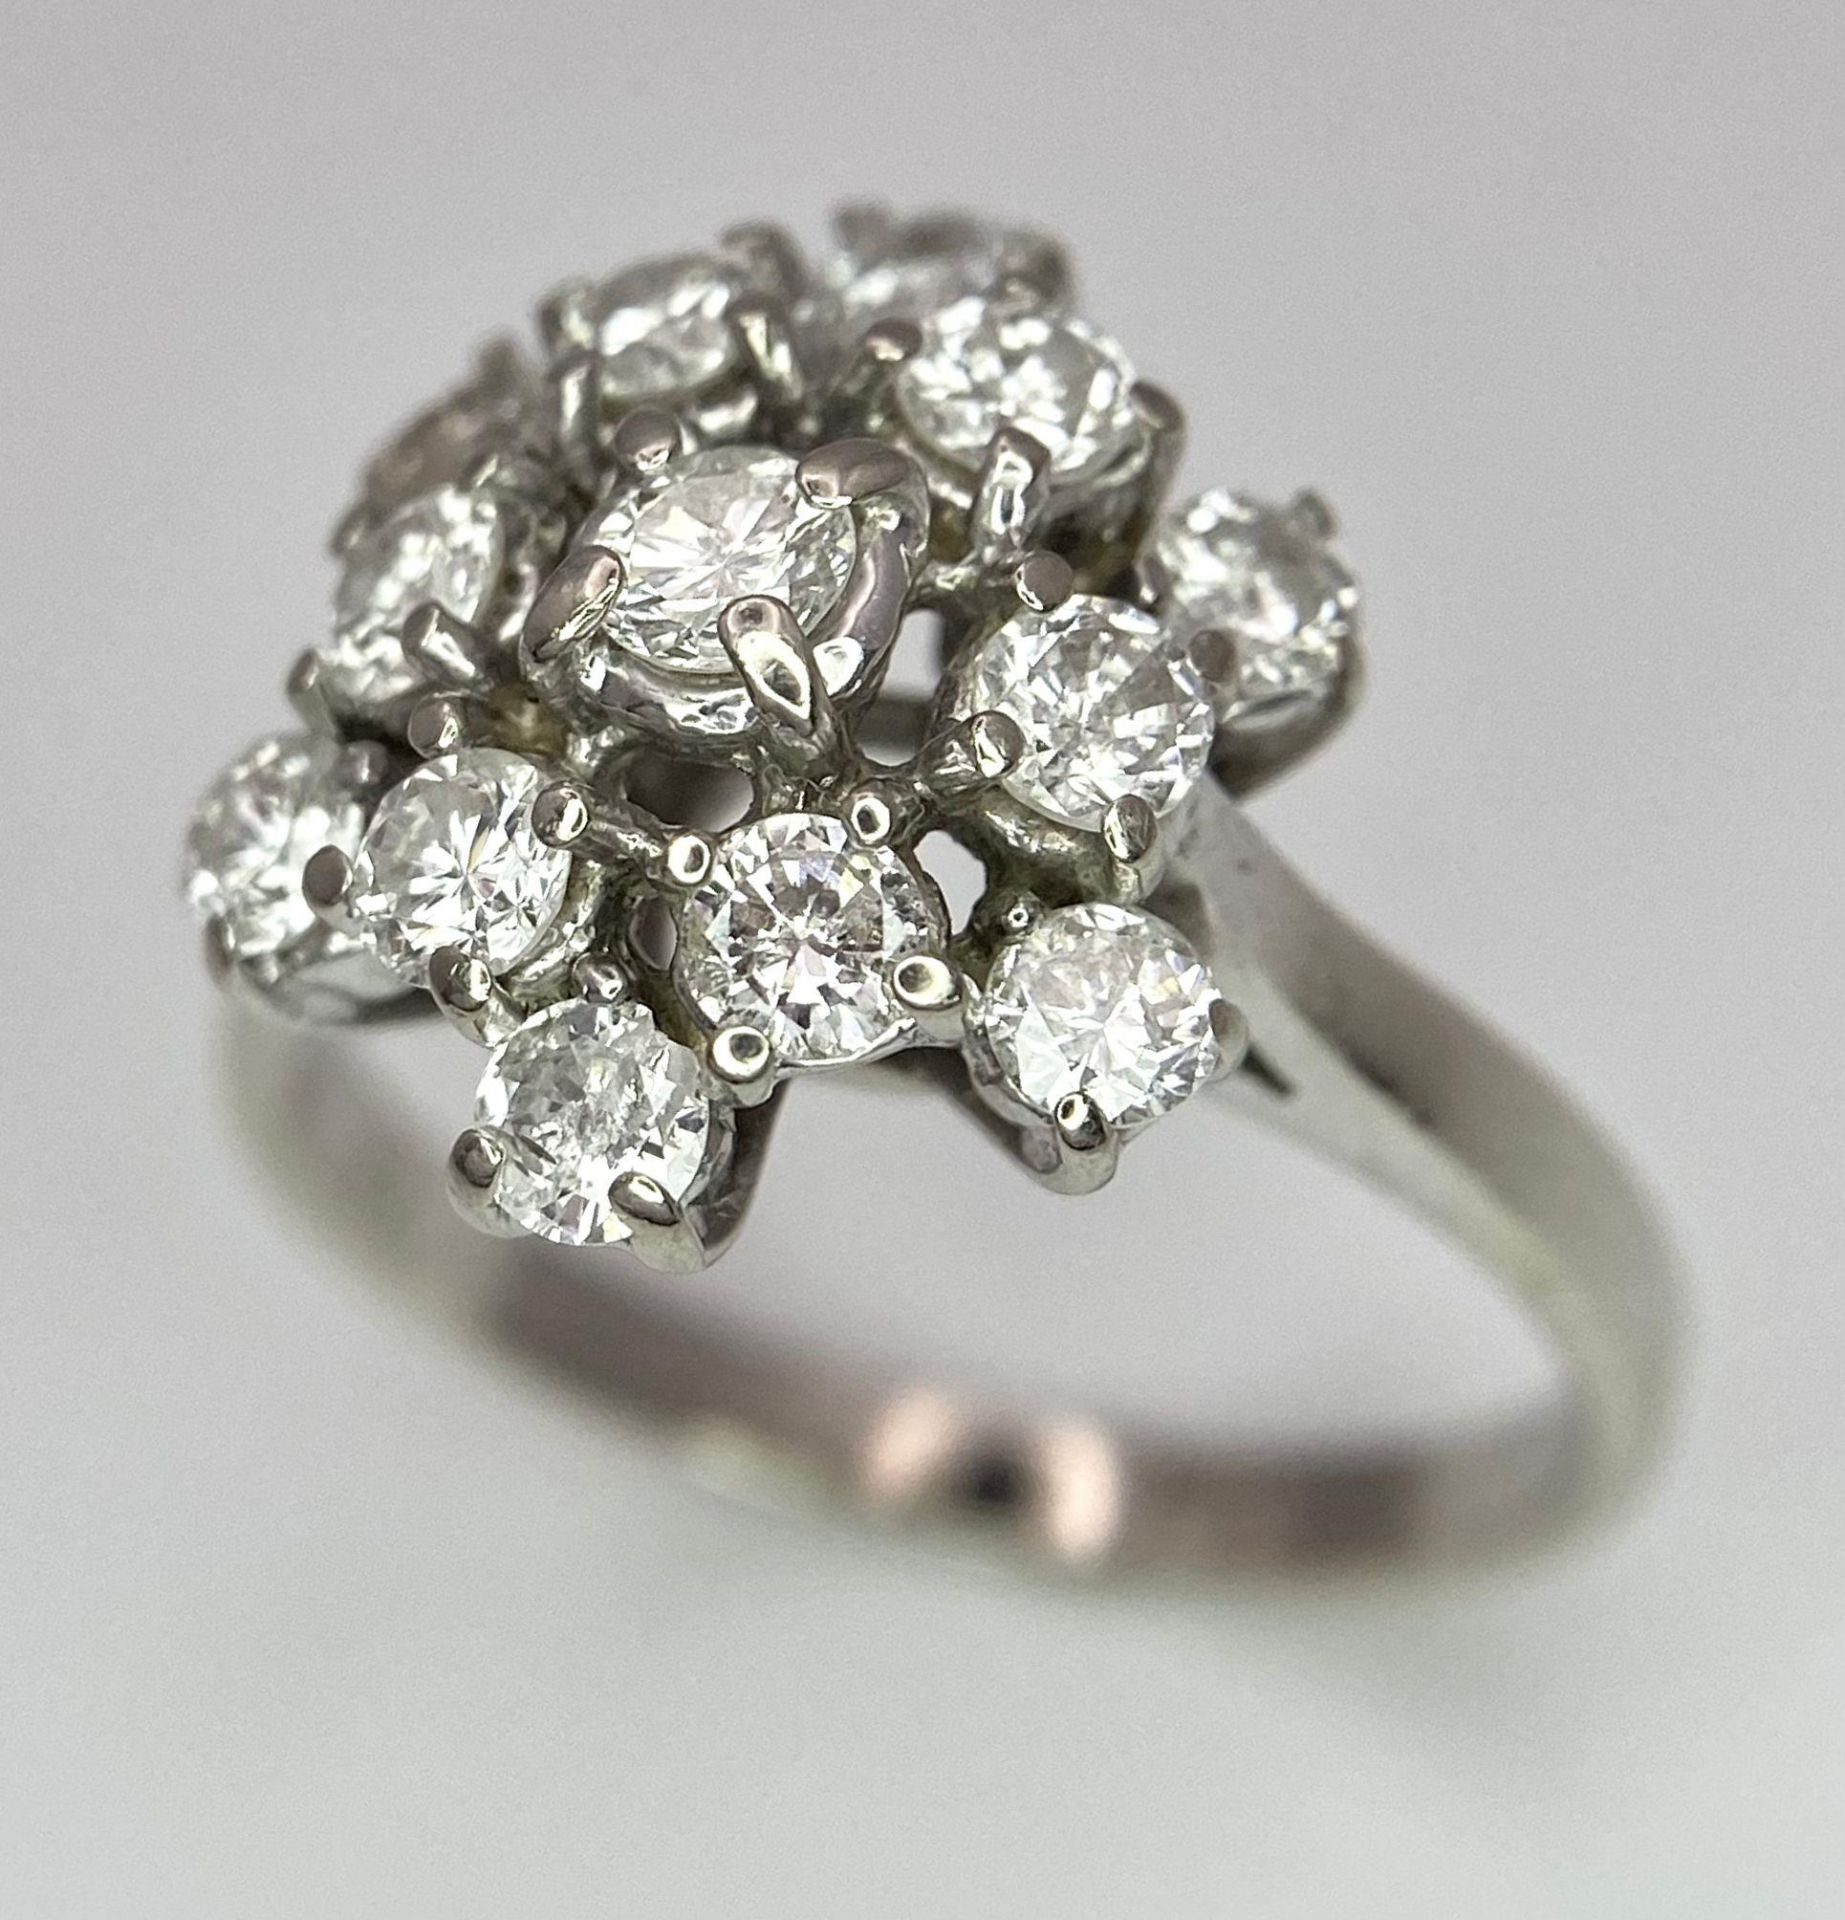 An 18 K white gold ring with a cluster of diamonds (1.10 carats), size: K, weight: 3.6 g.